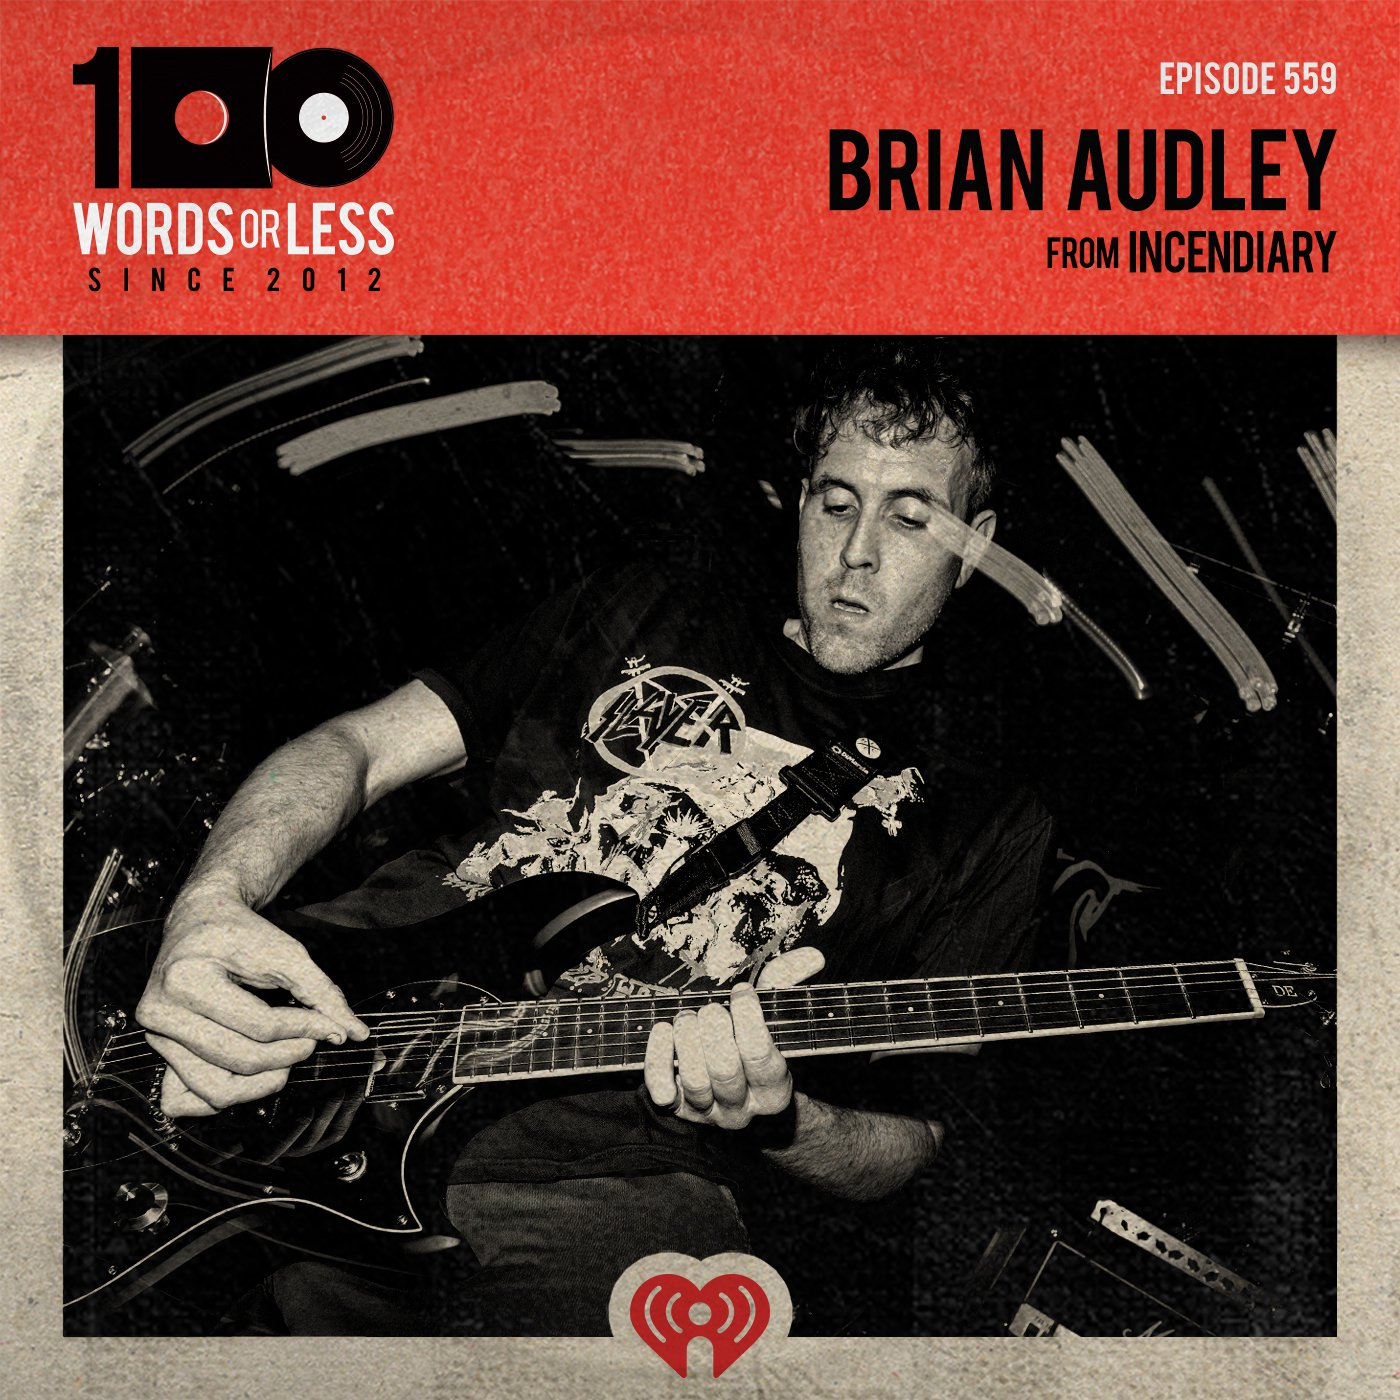 Brian Audley from Incendiary